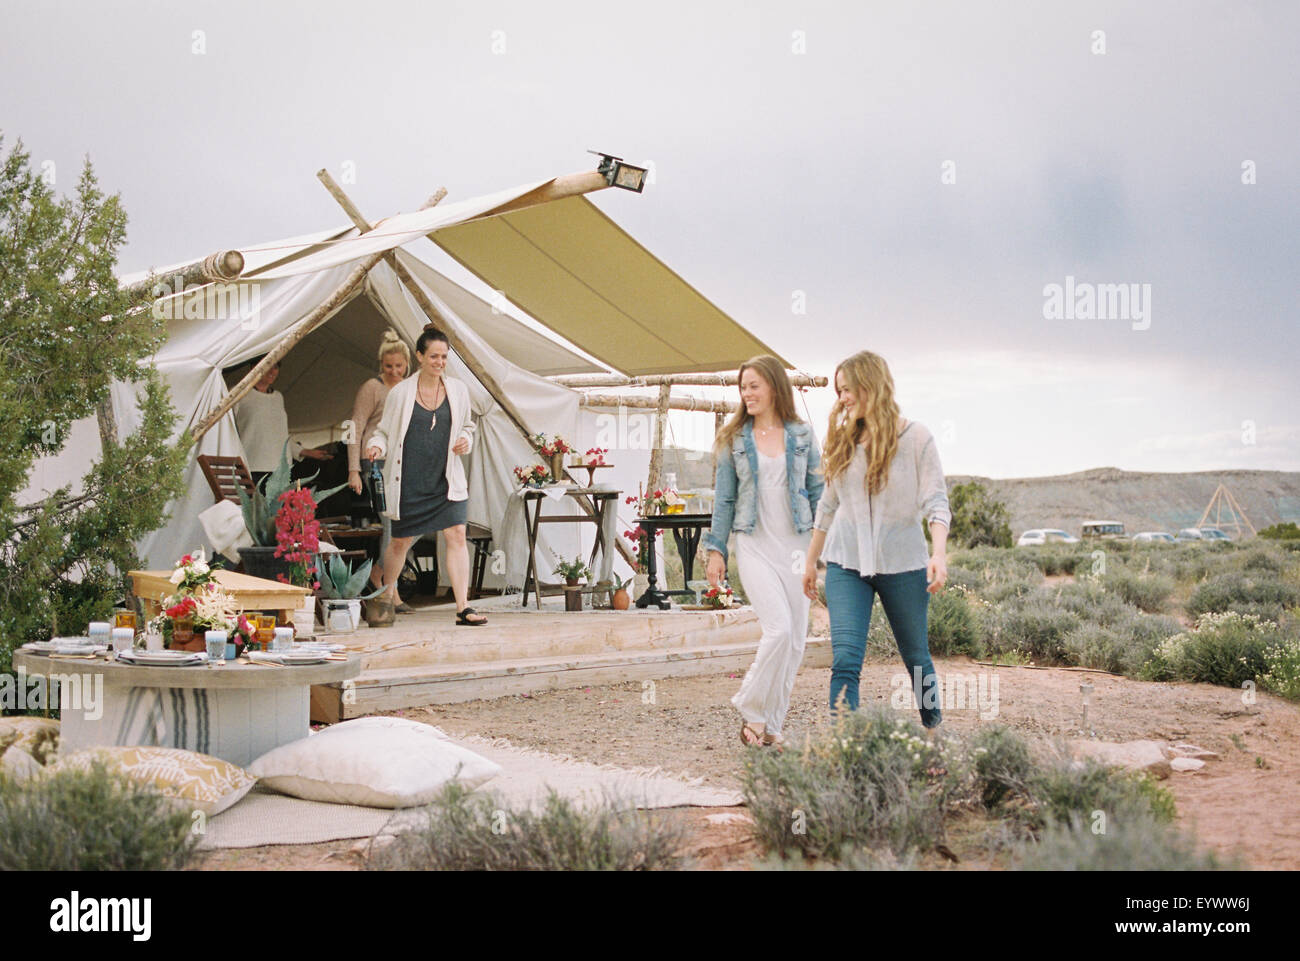 Group of friends enjoying an outdoor meal in a desert, a tent in the background. Stock Photo